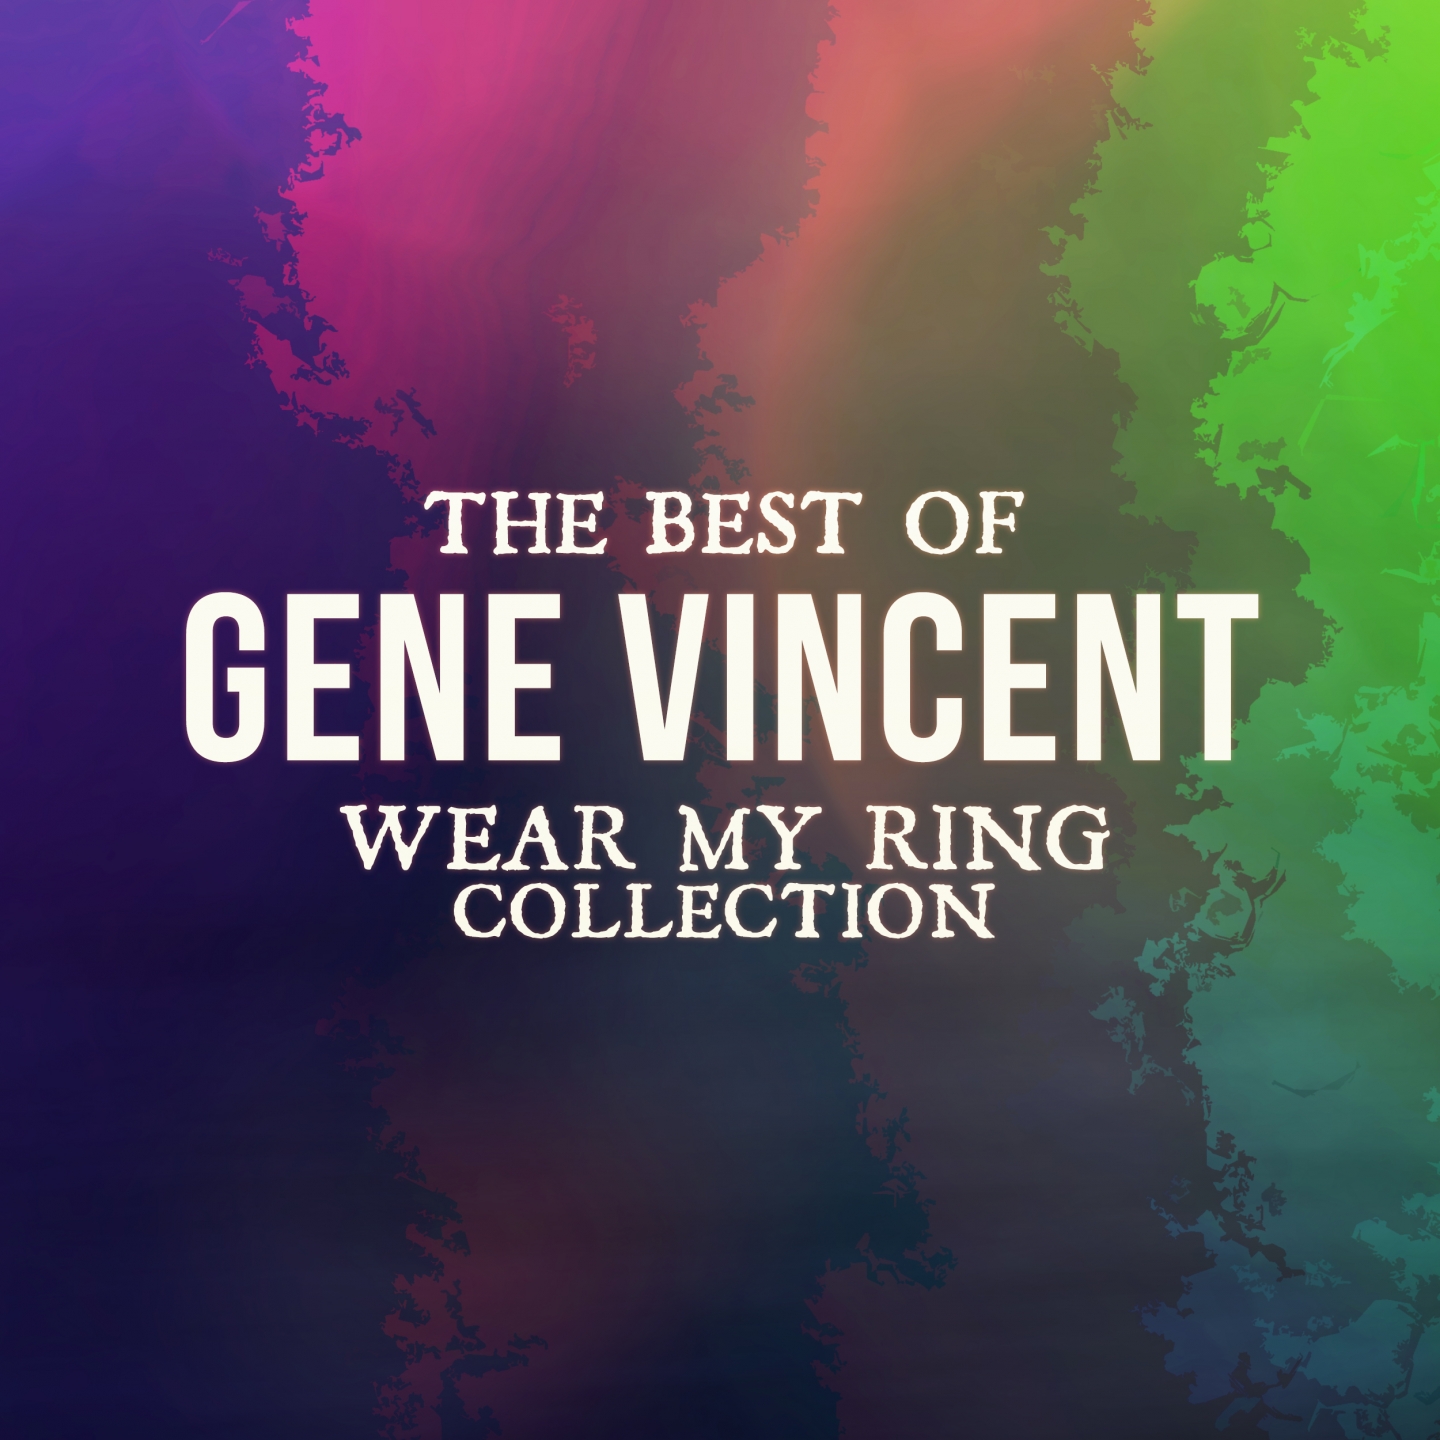 The Best Of Gene Vincent (Wear My Ring Collection)